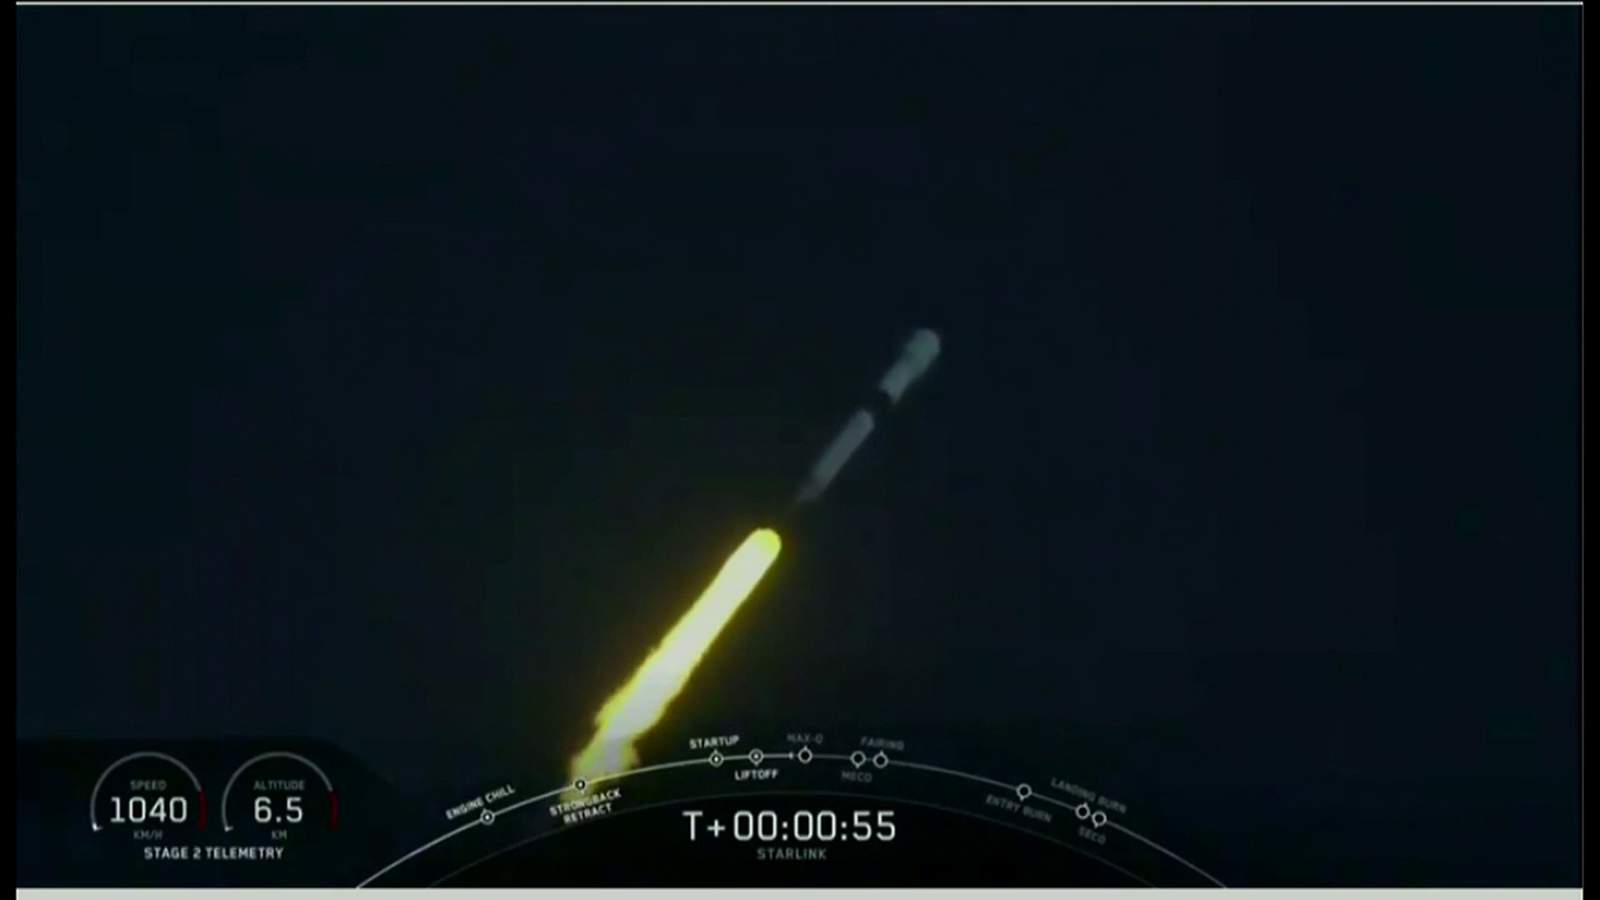 SpaceX launches Falcon 9, sends satellites into orbit